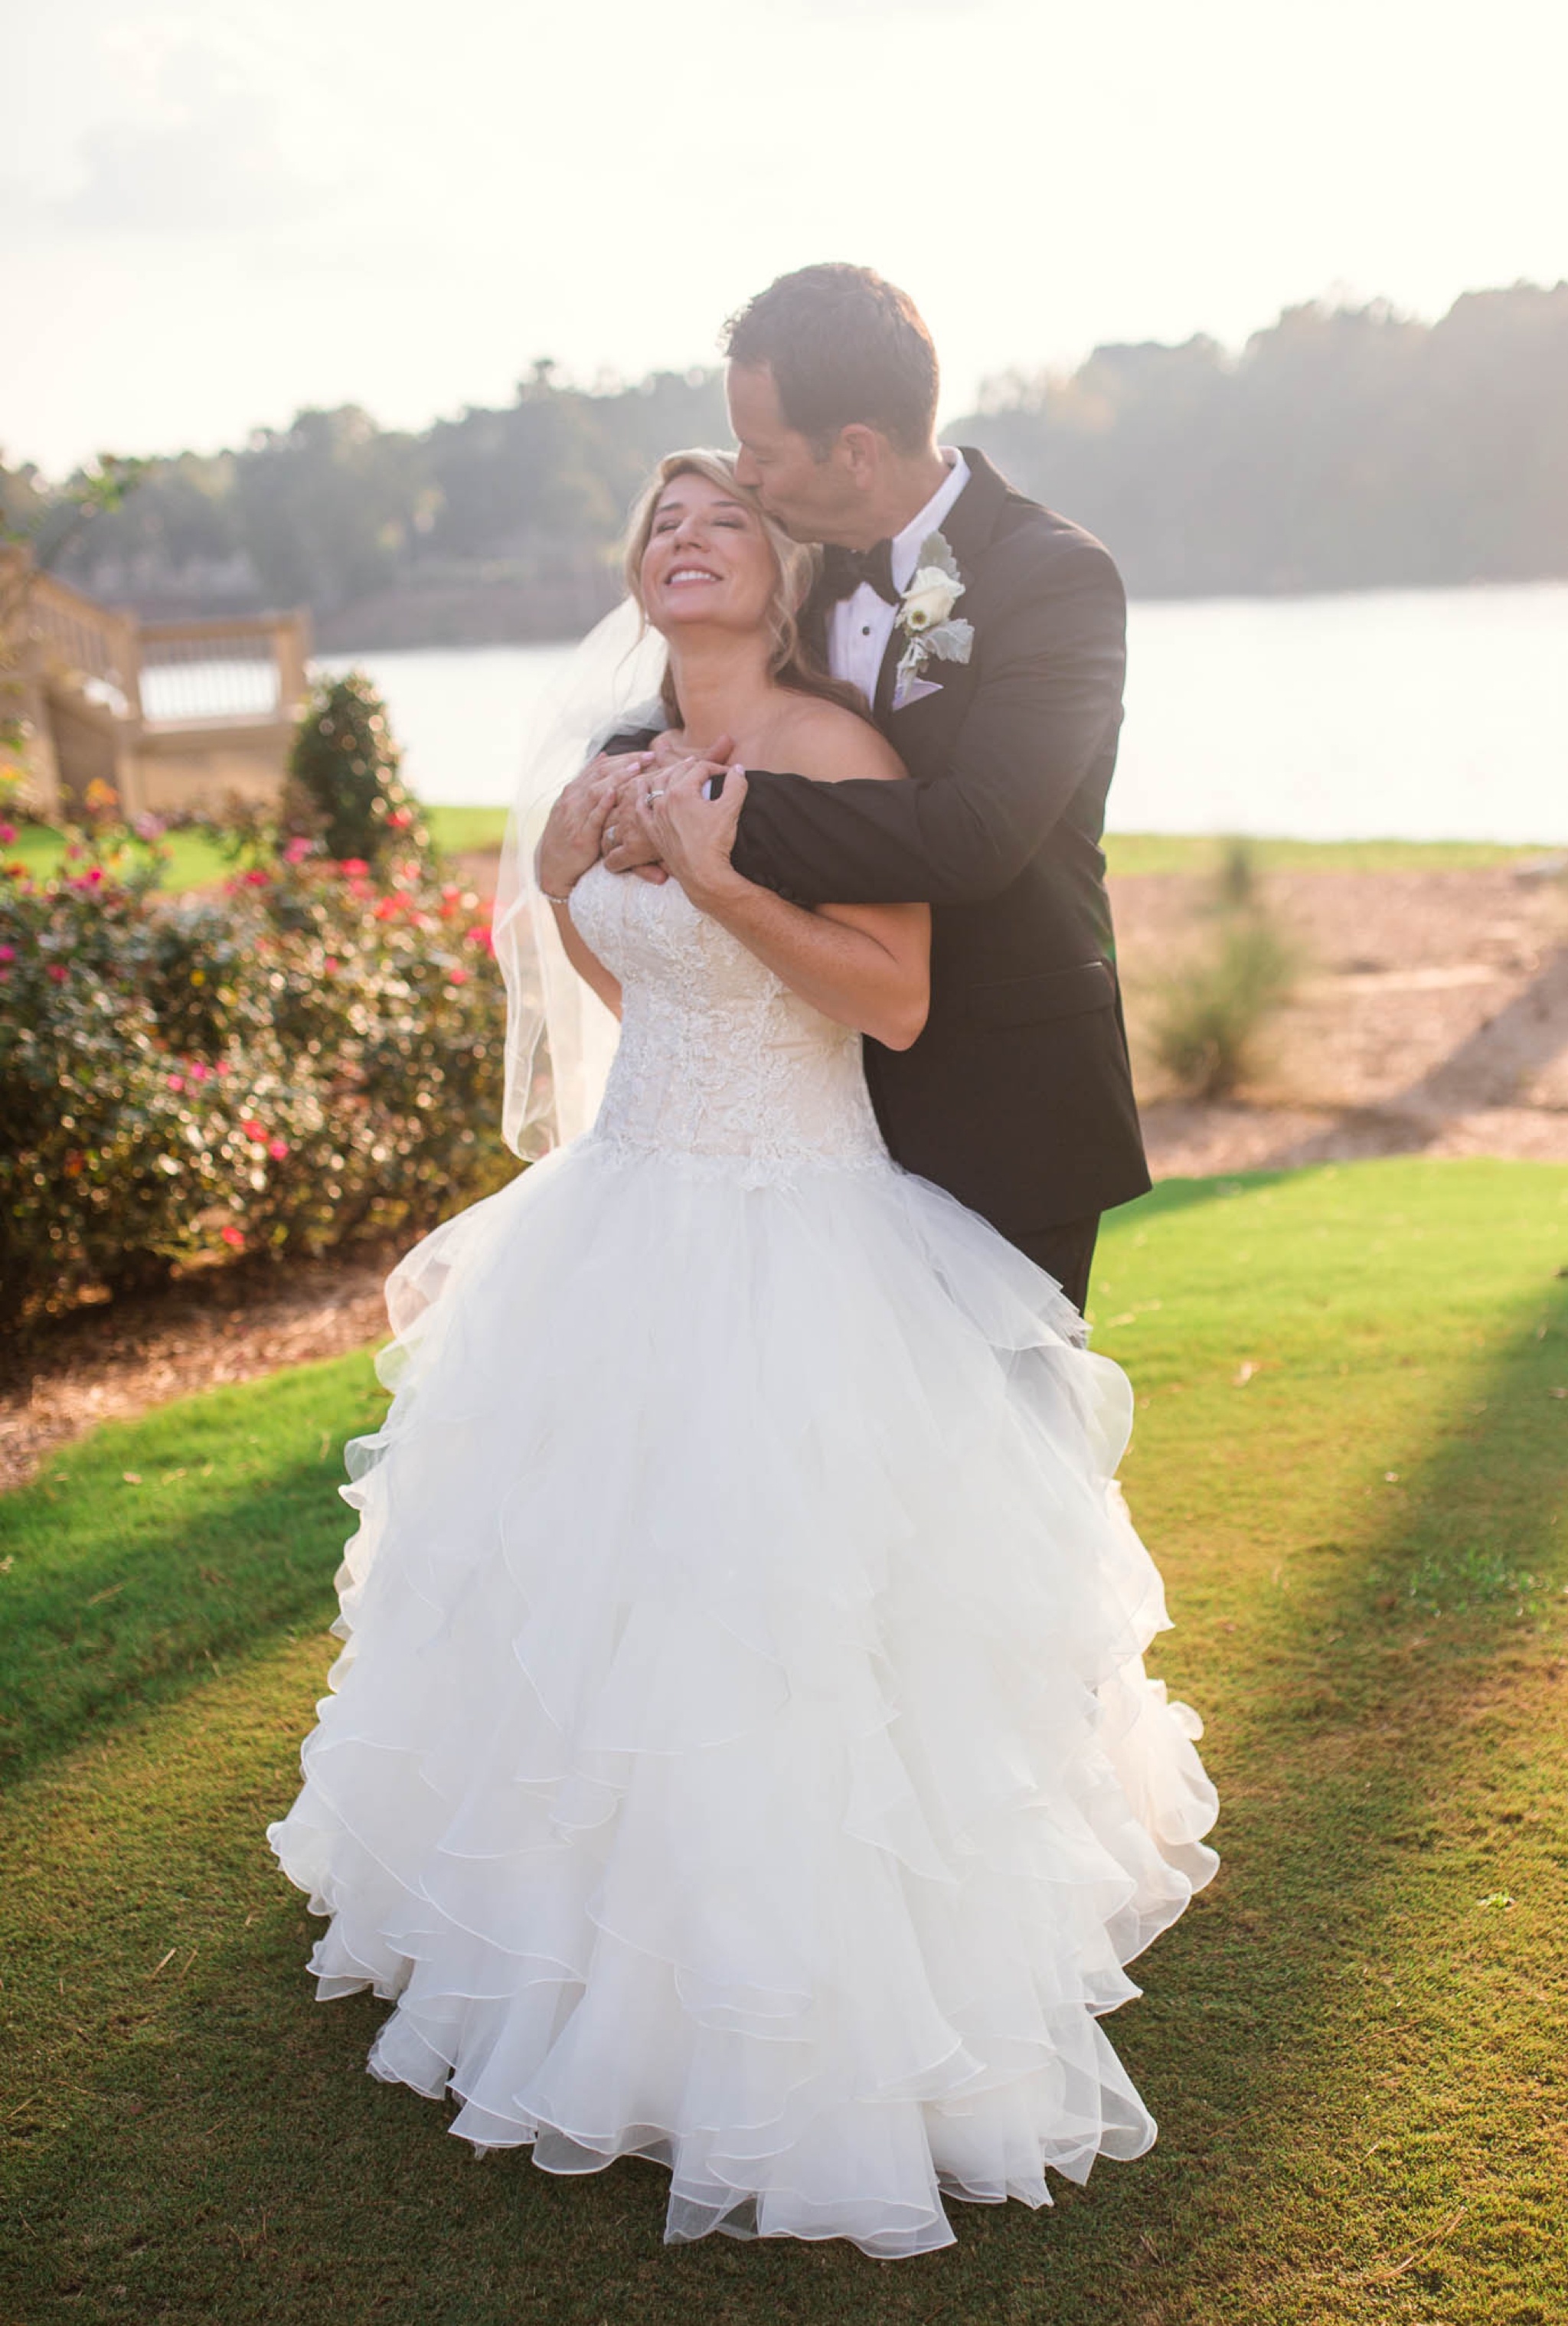 Bride and Groom Portraits - Dona + Doug - MacGregor Downs Country Club in Cary, NC - Raleigh Wedding Photographer